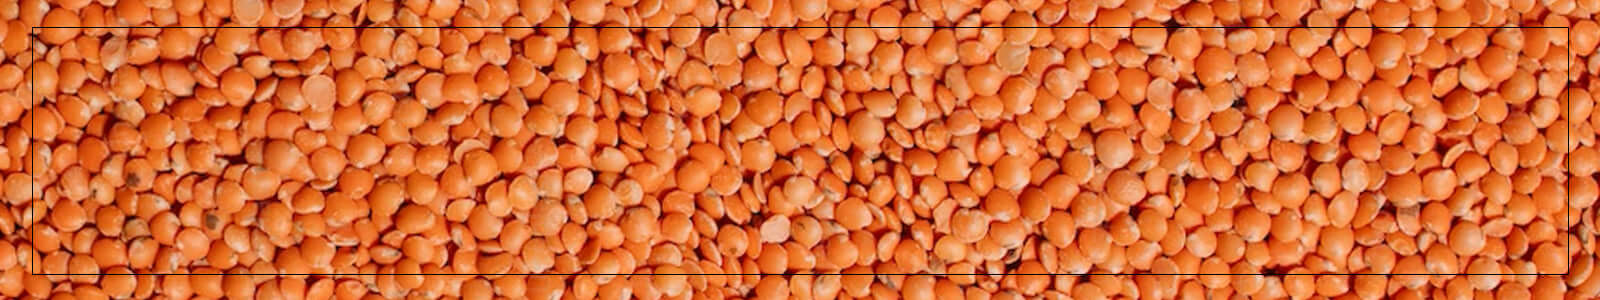 Red whole lentils - Buy from the natural foods store in the USA - Alive Herbals.